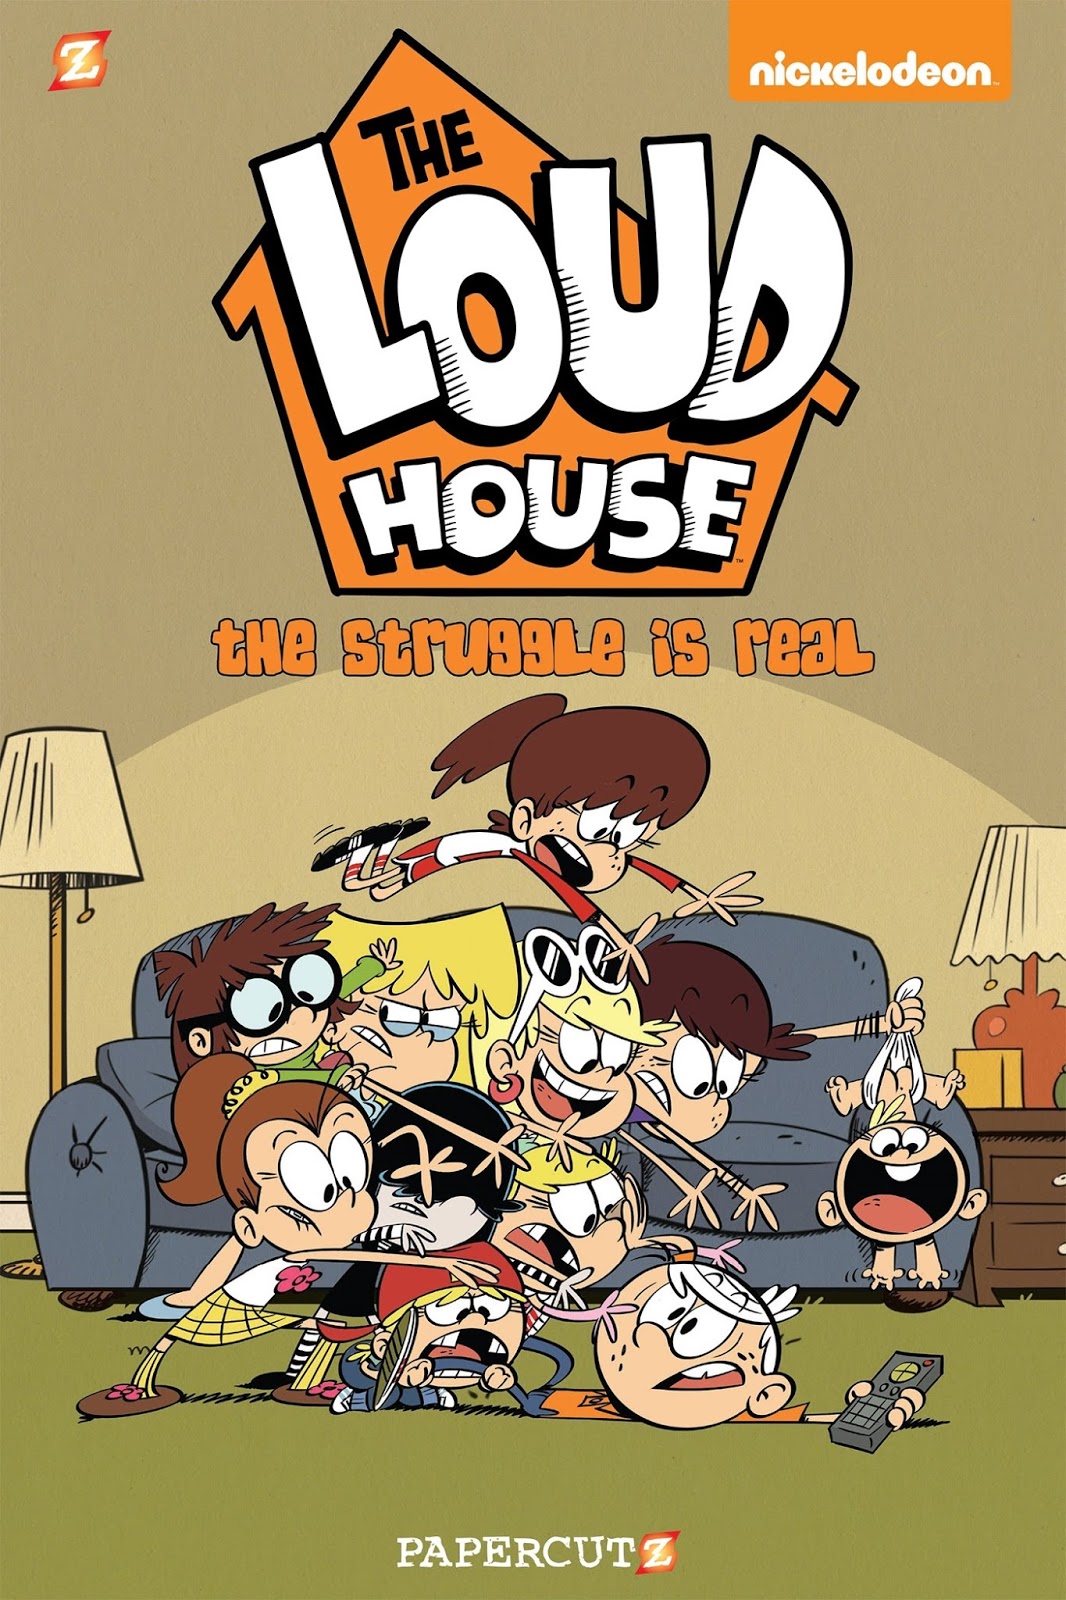 Nickelodeon And Papercutz To Release The Loud House 5 The Man With The Plan Graphic Novel On 